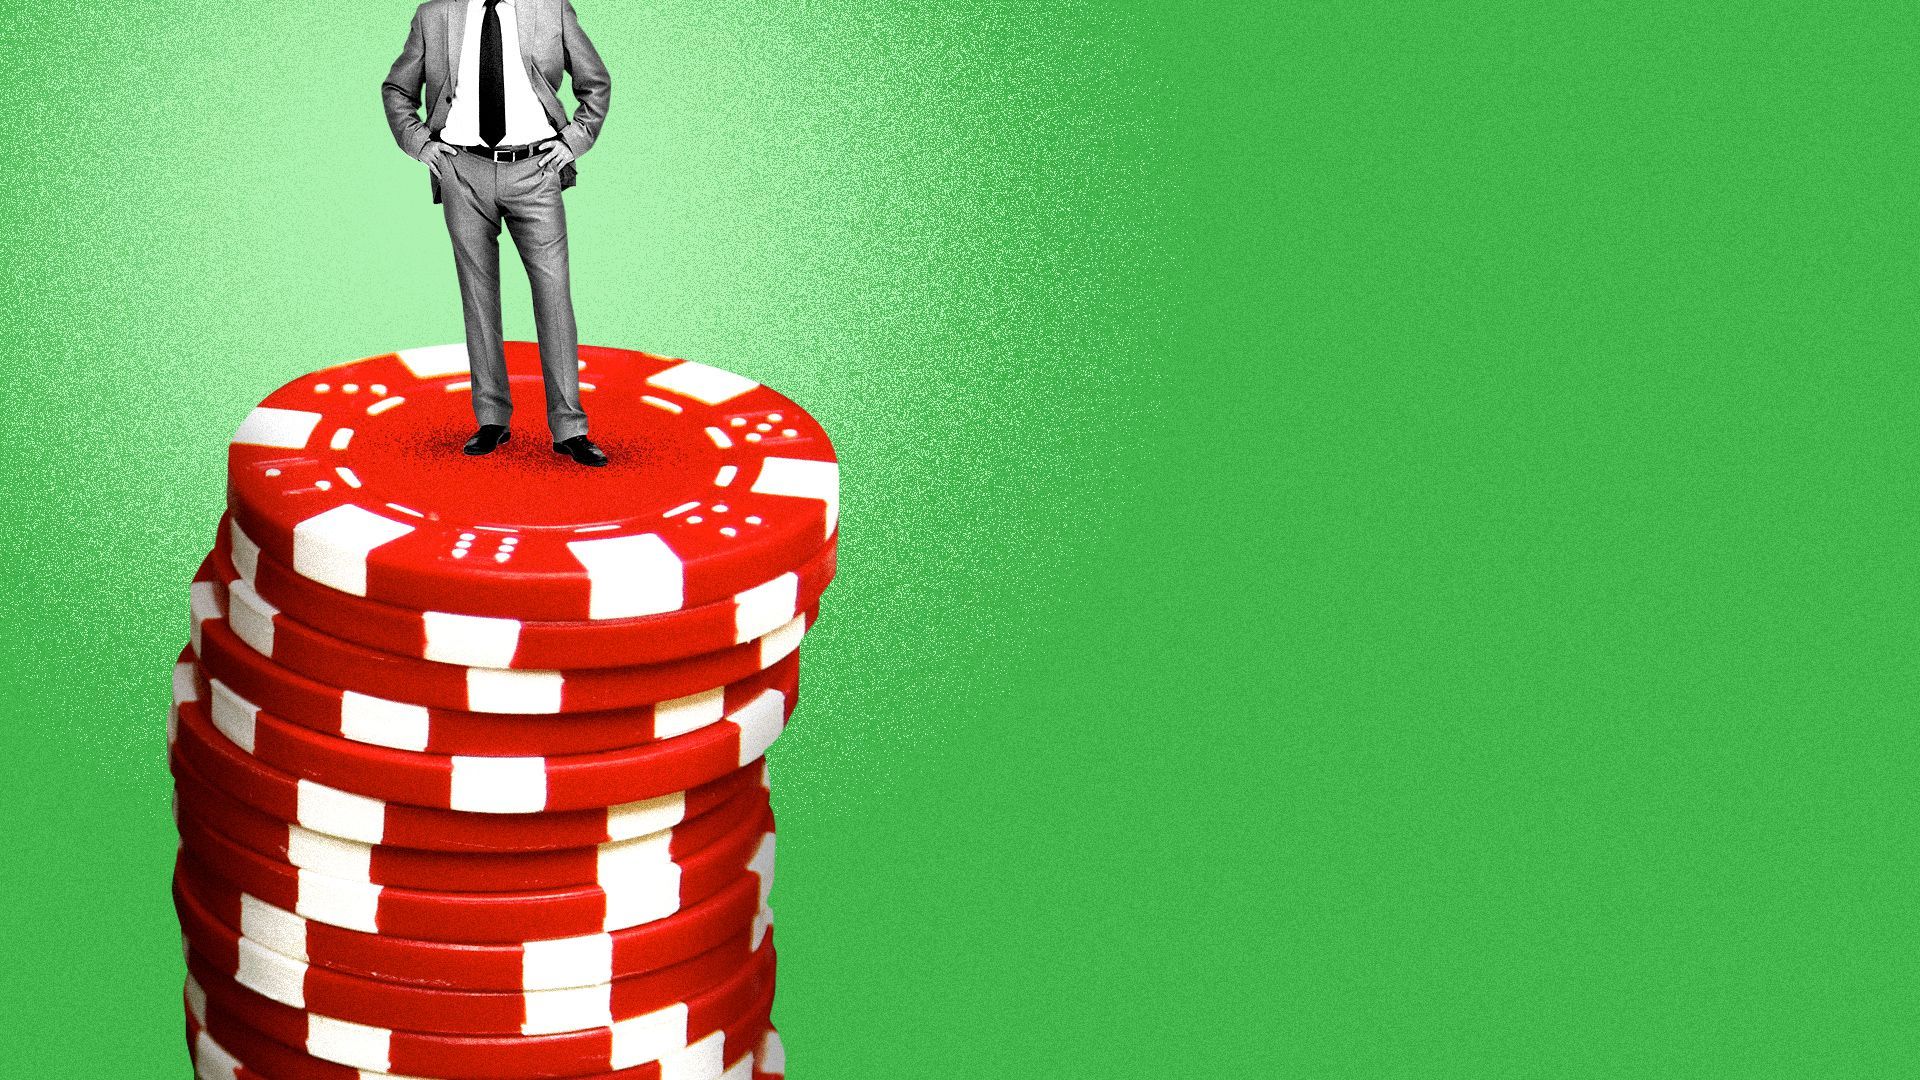 Illustration of a man standing resolutely on top of a stack of poker chips.